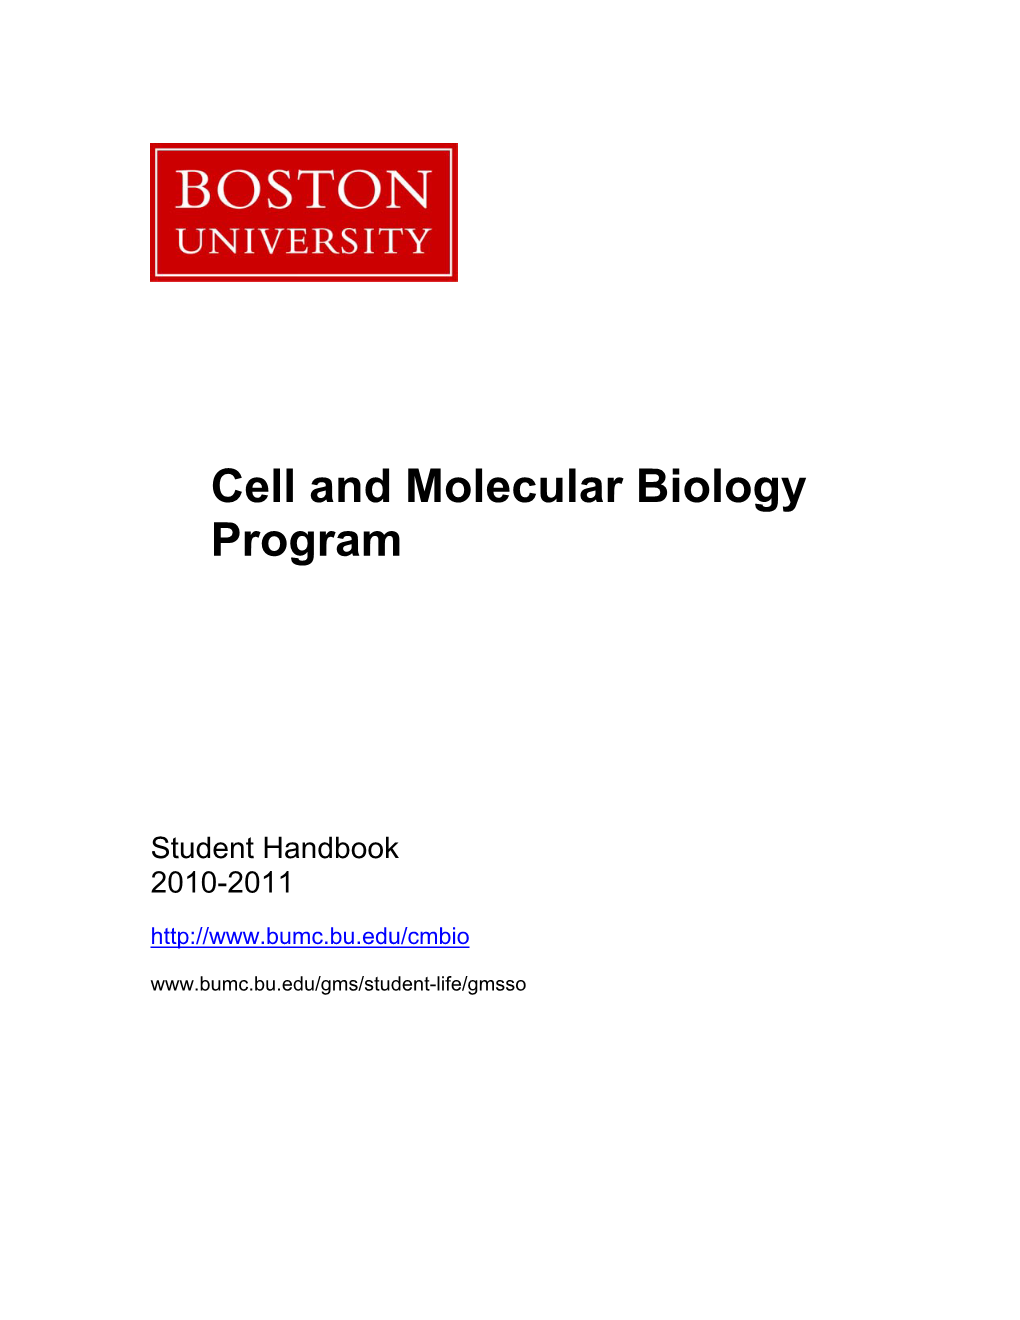 Cell and Molecular Biology Program, You Will Be Expected to Rotate Through Three to Four Laboratories During the Year